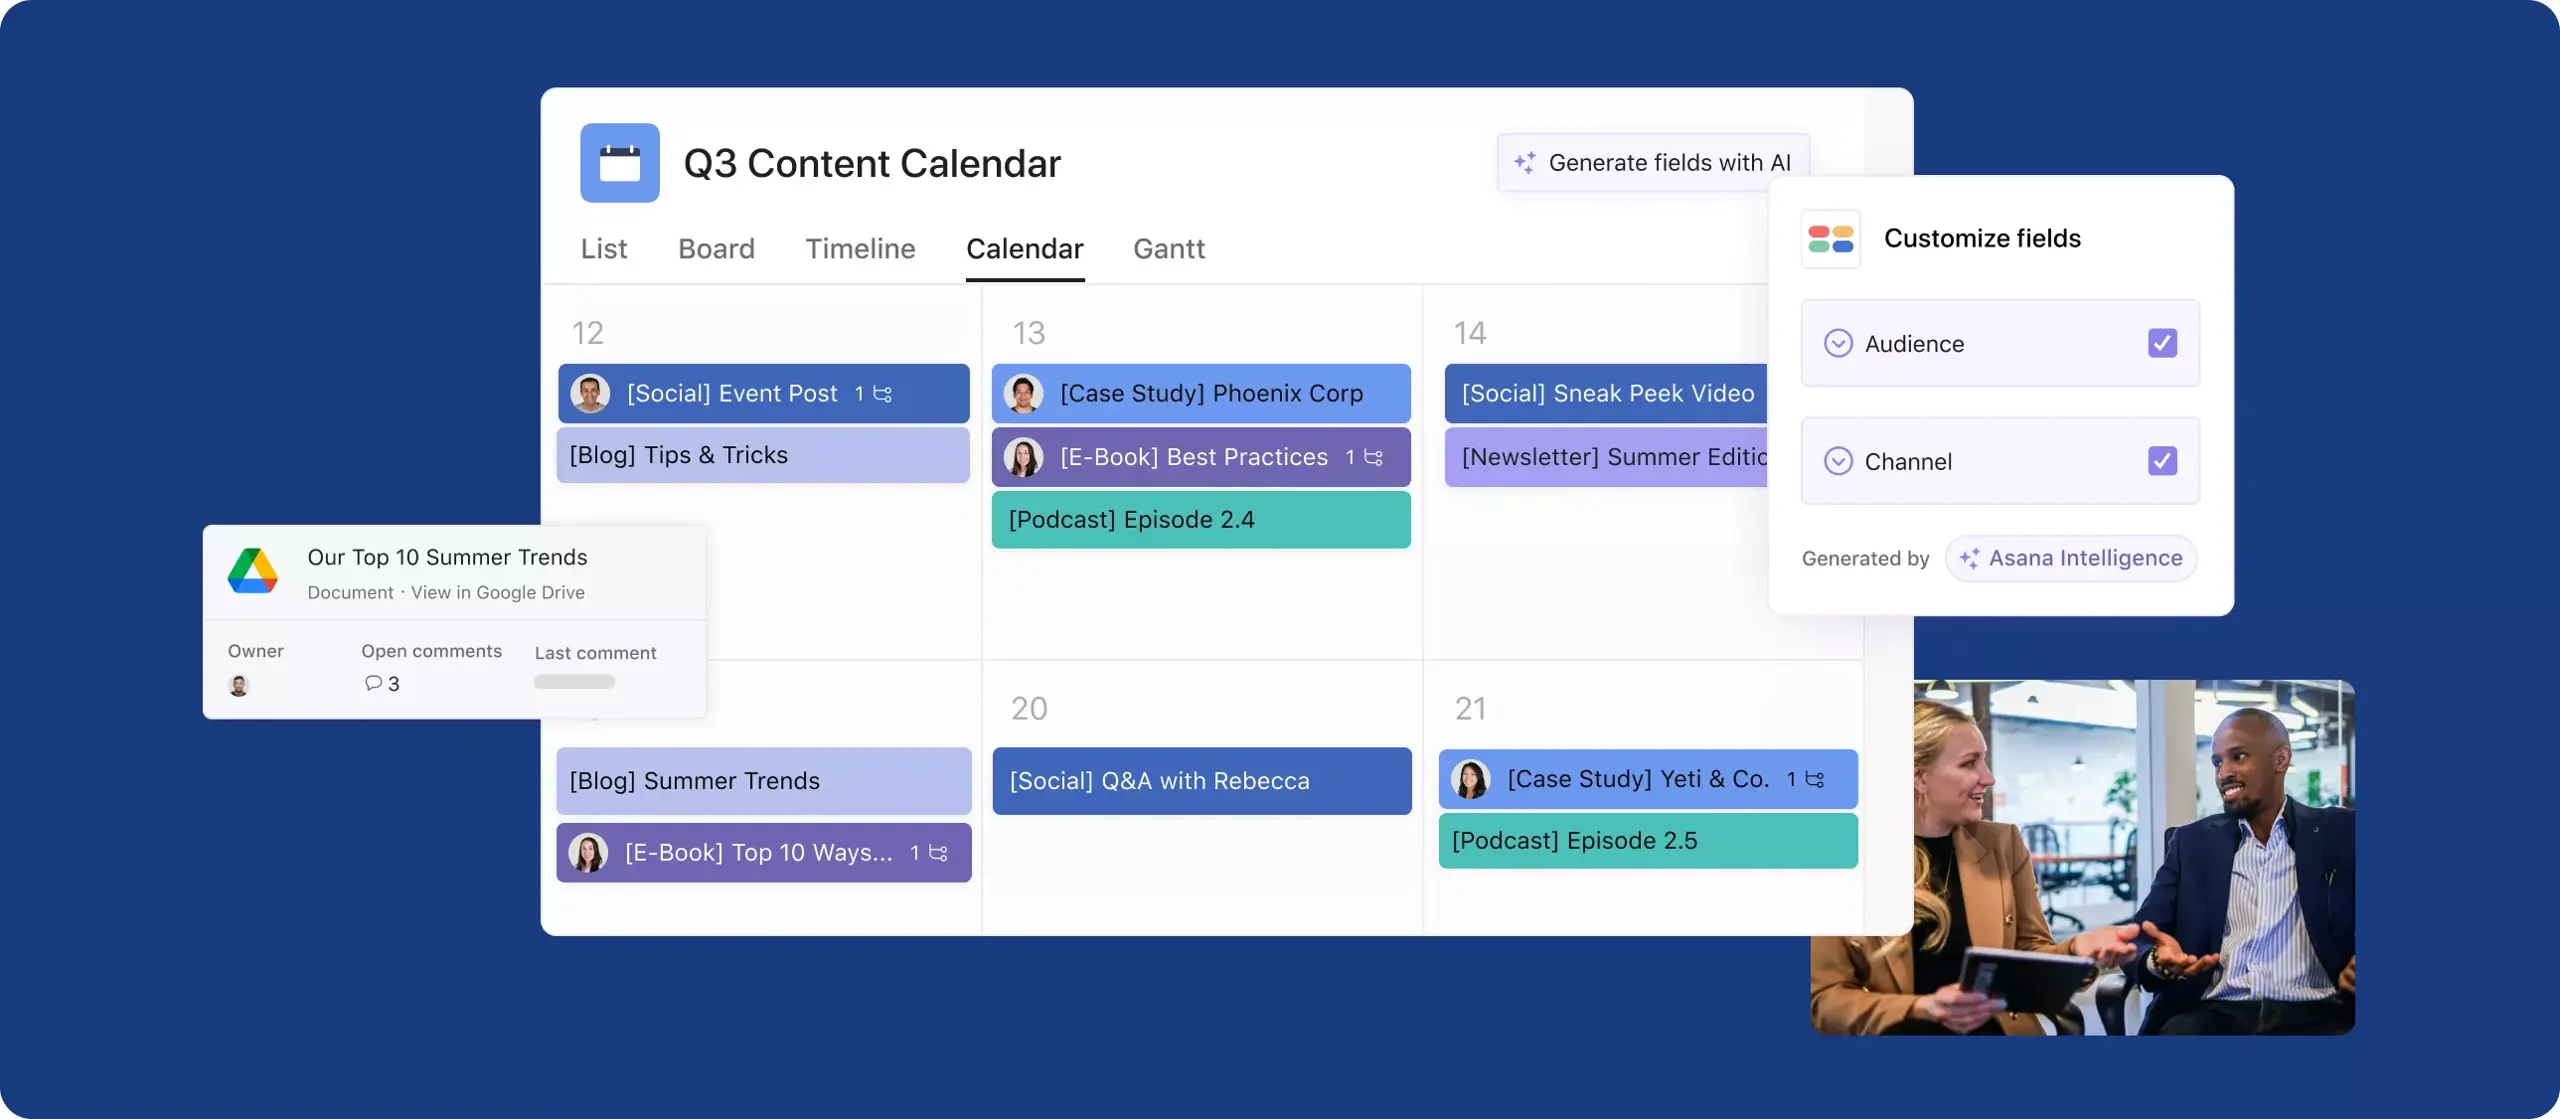 Content calendar hero image: Abstracted product UI